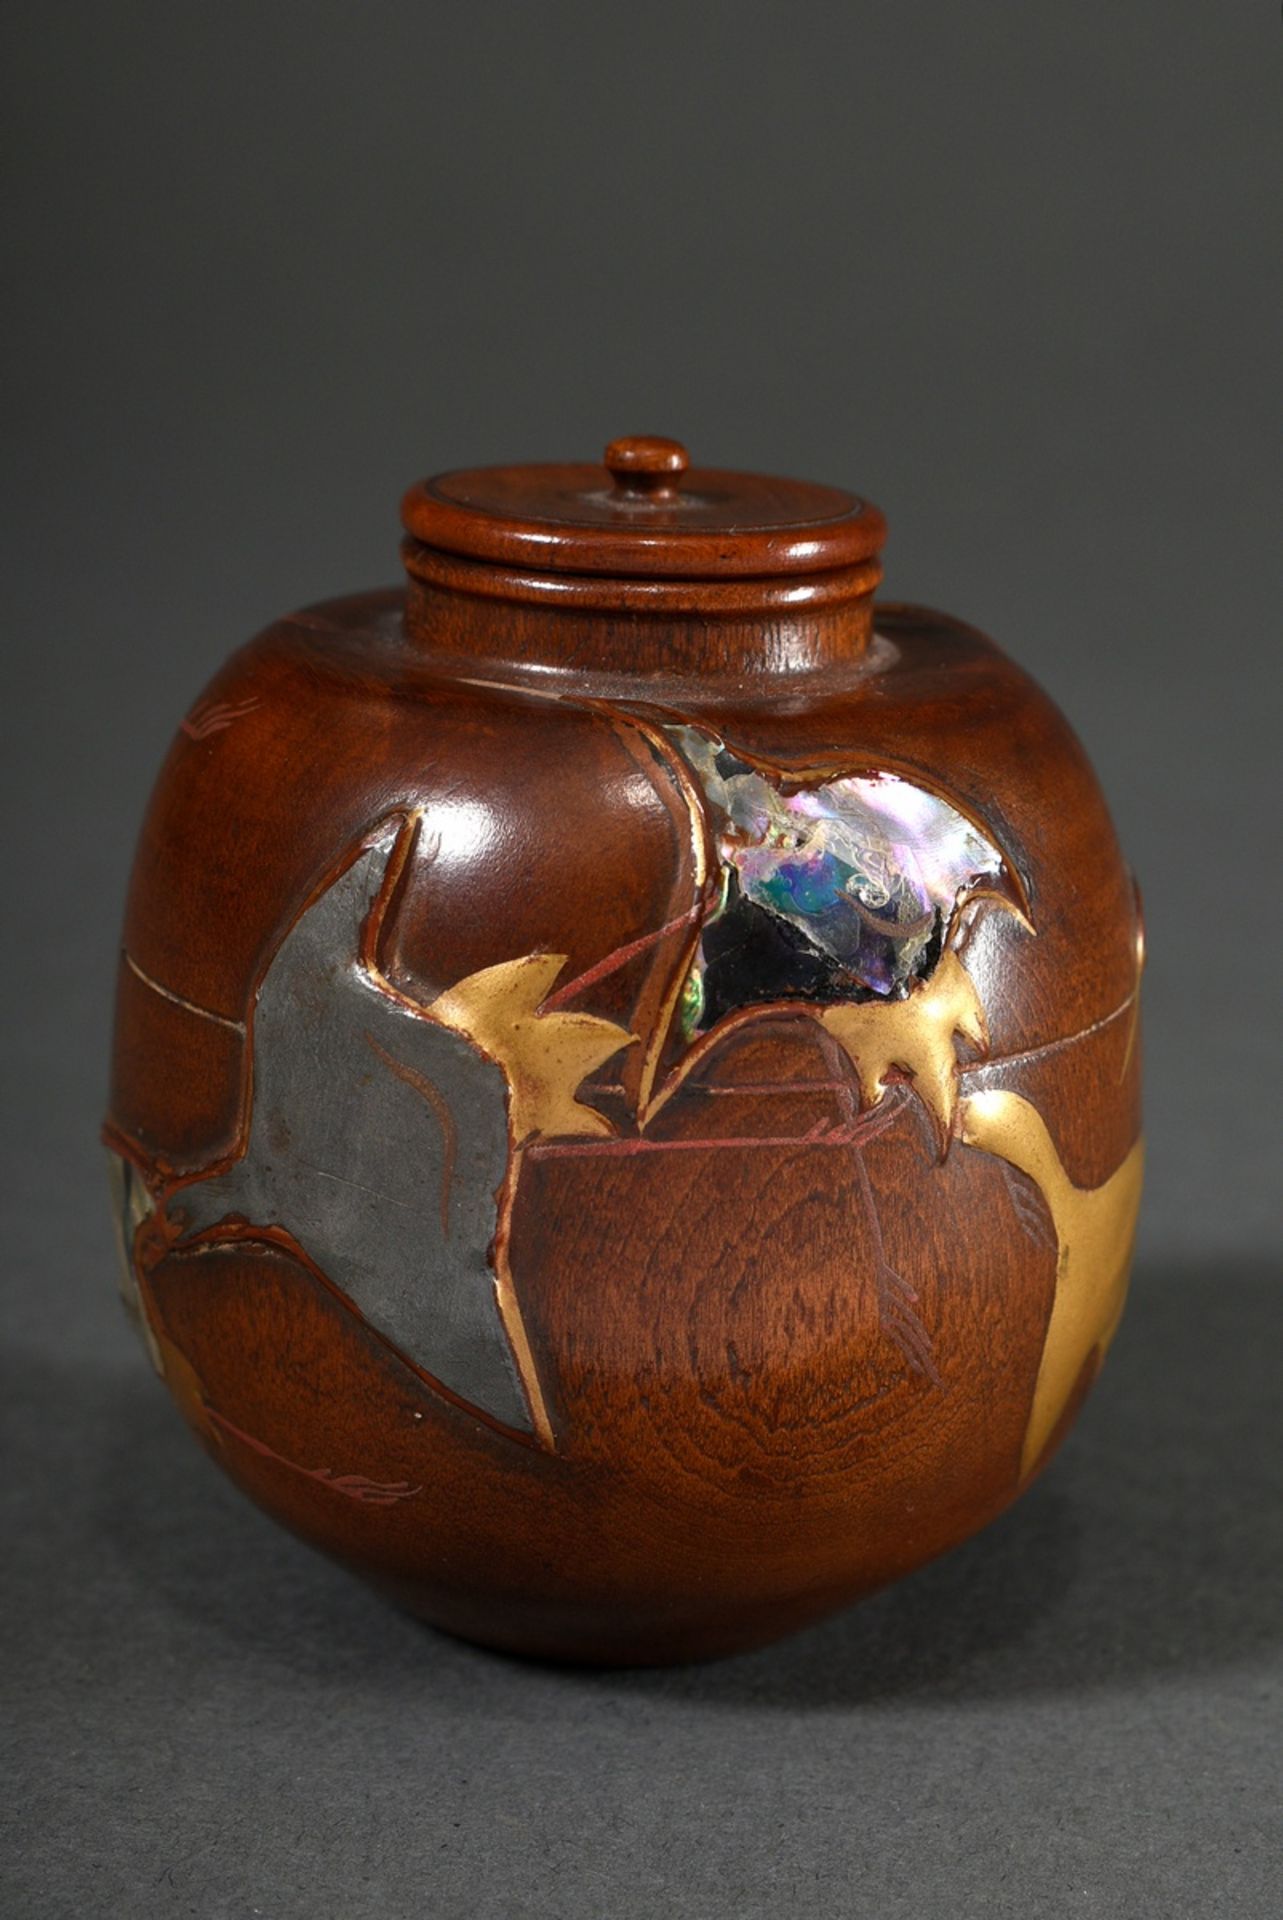 Japanese boxwood "Natsume" tea caddy with lacquer and mother-of-pearl inlays "7 Cranes", Meiji/Show